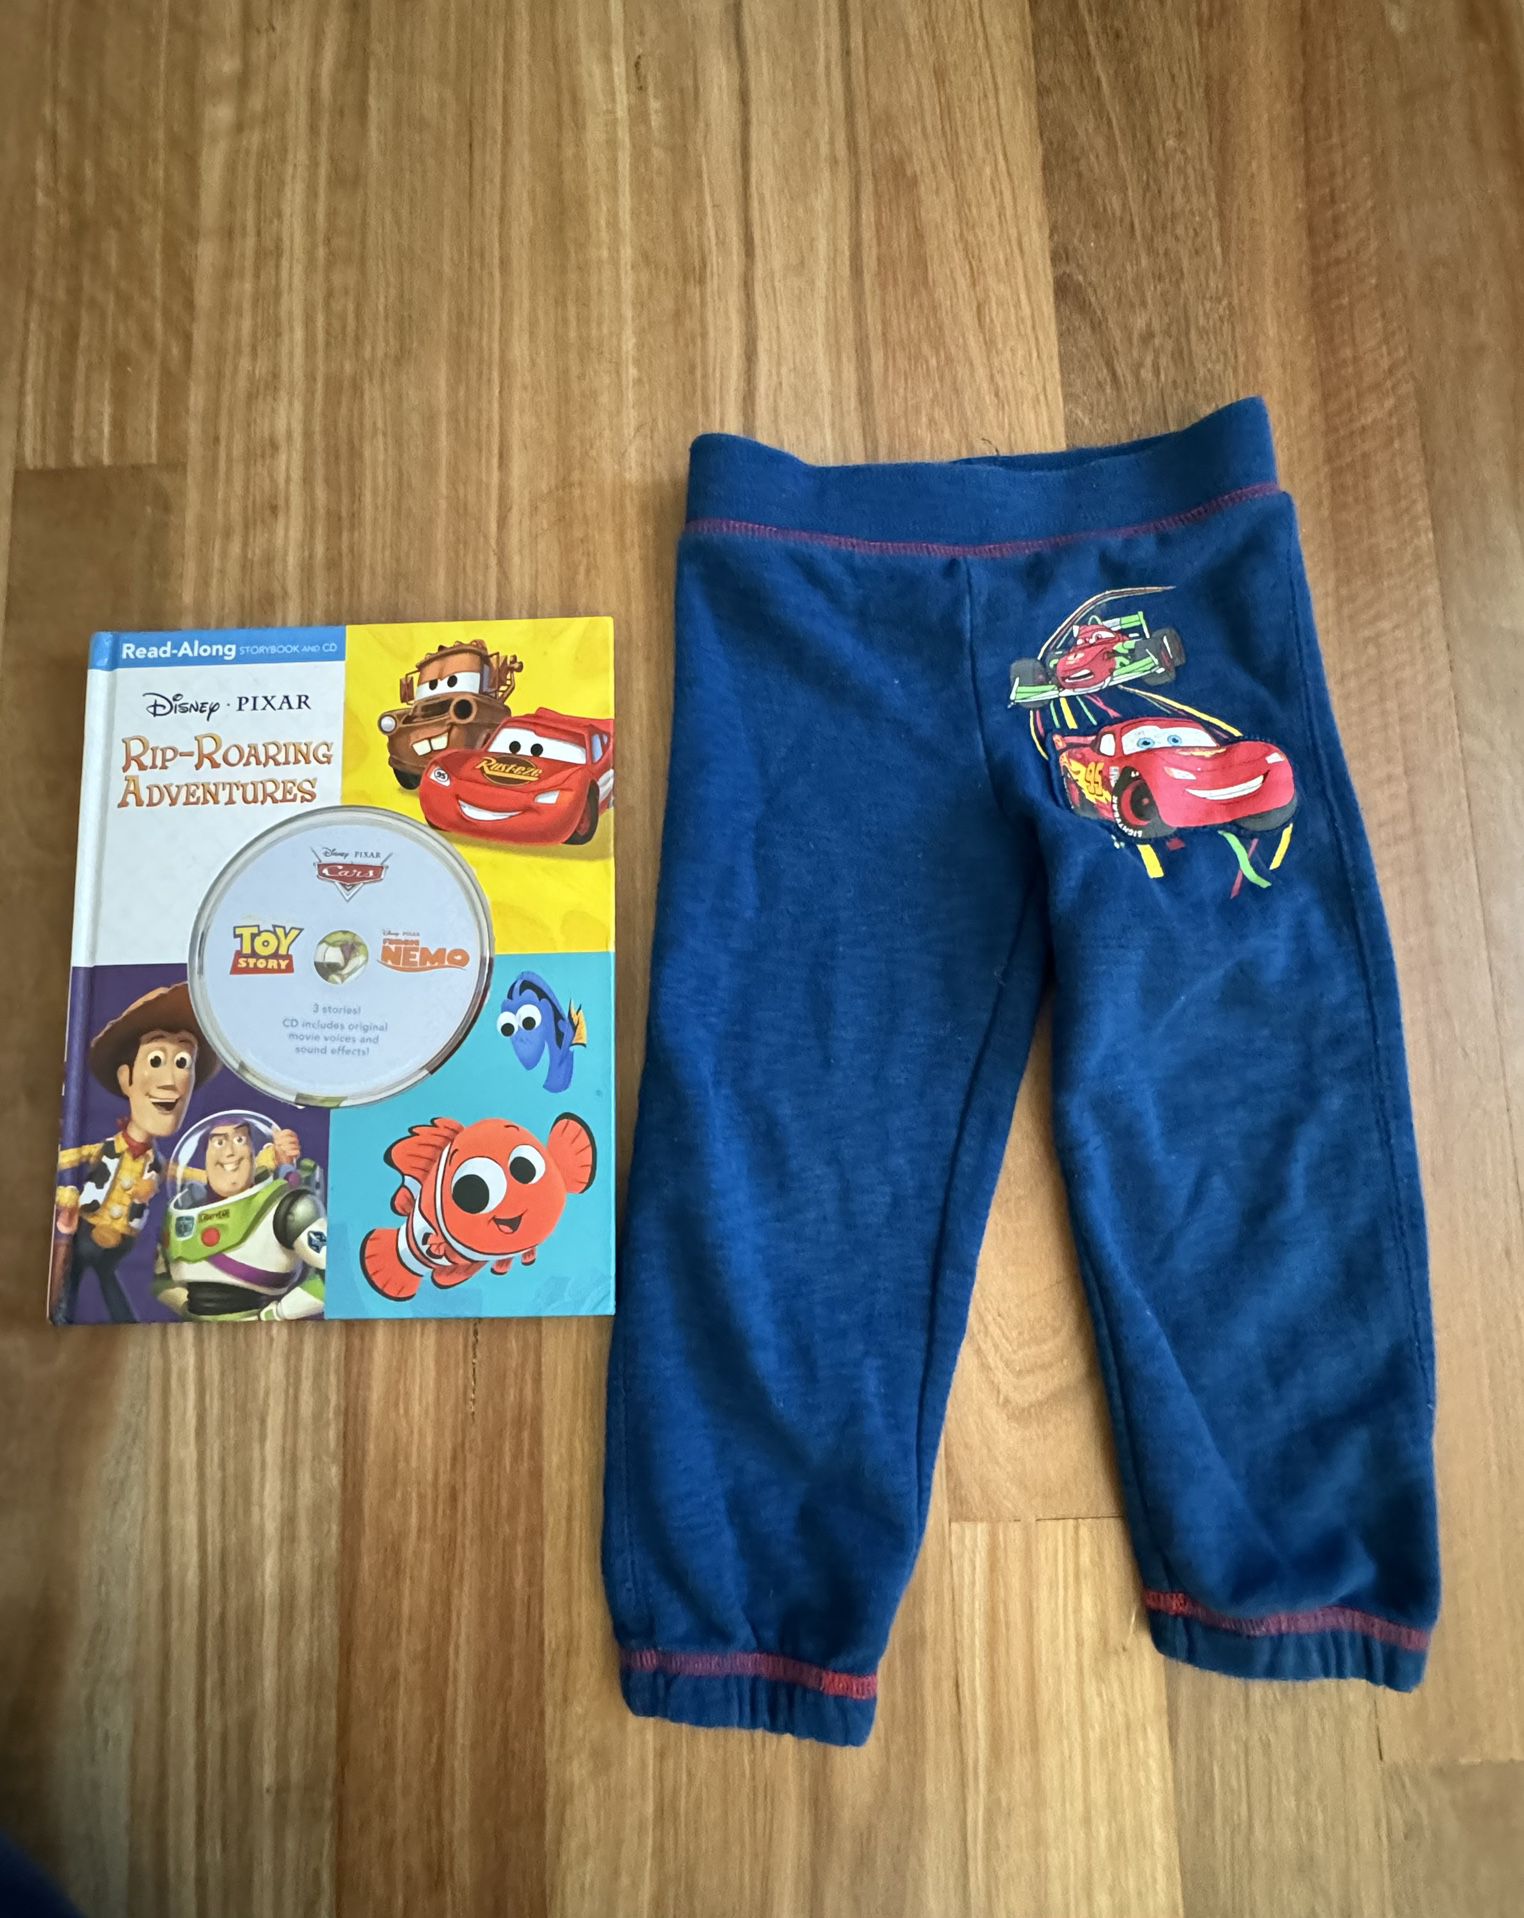 Disney Cars 3 Book with CD & 3T sweatpants